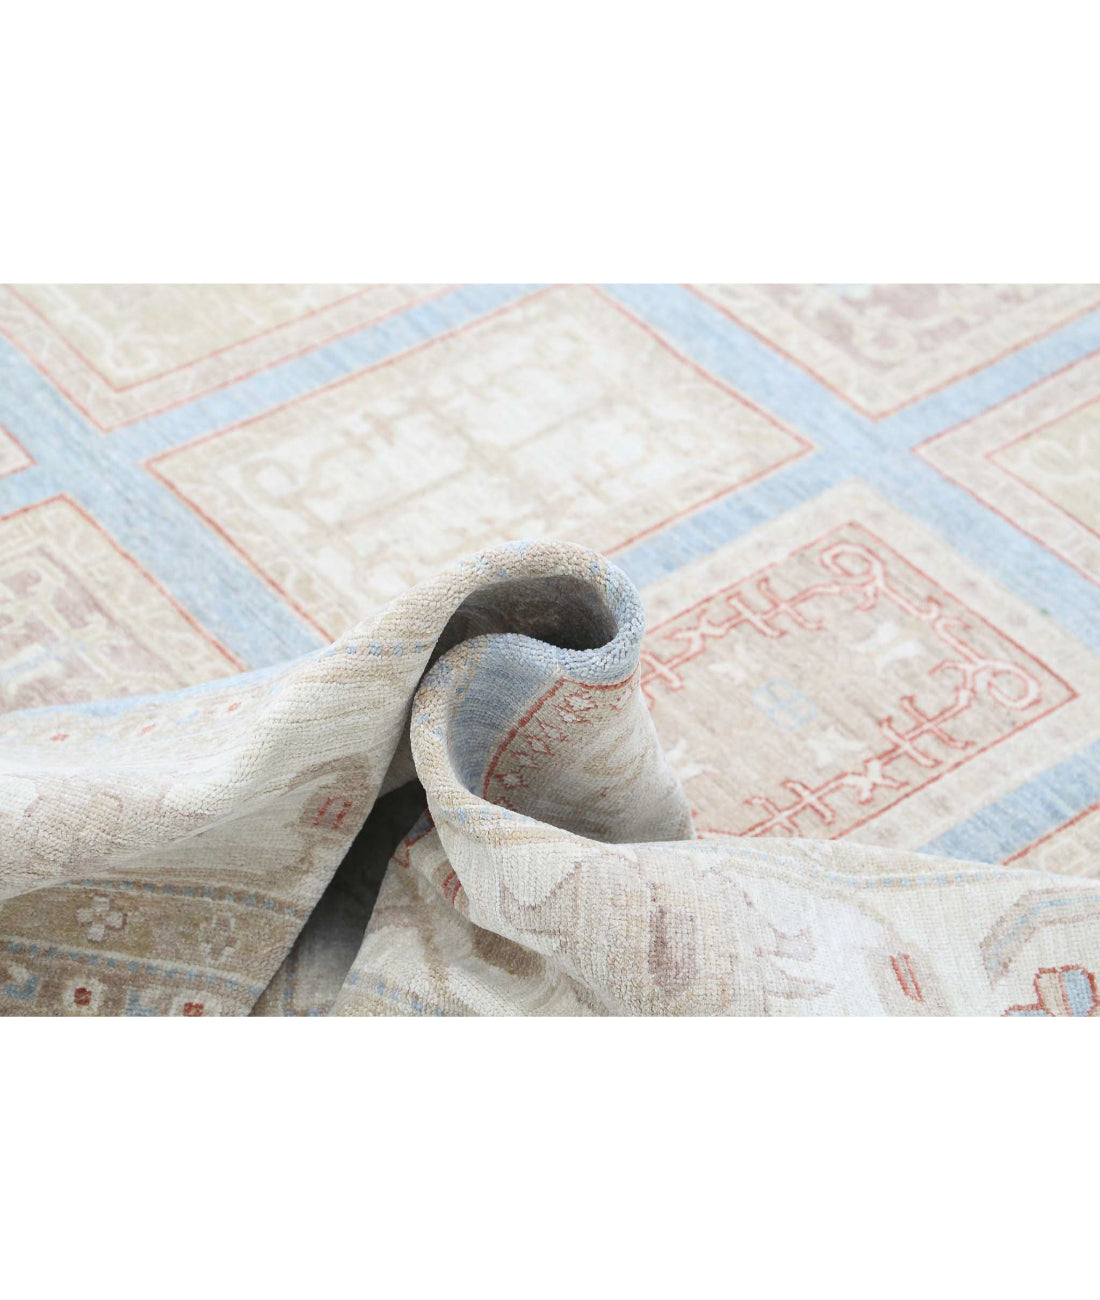 Hand Knotted Serenity Wool Rug - 8'1'' x 10'11'' 8'1'' x 10'11'' (243 X 328) / Blue / Ivory